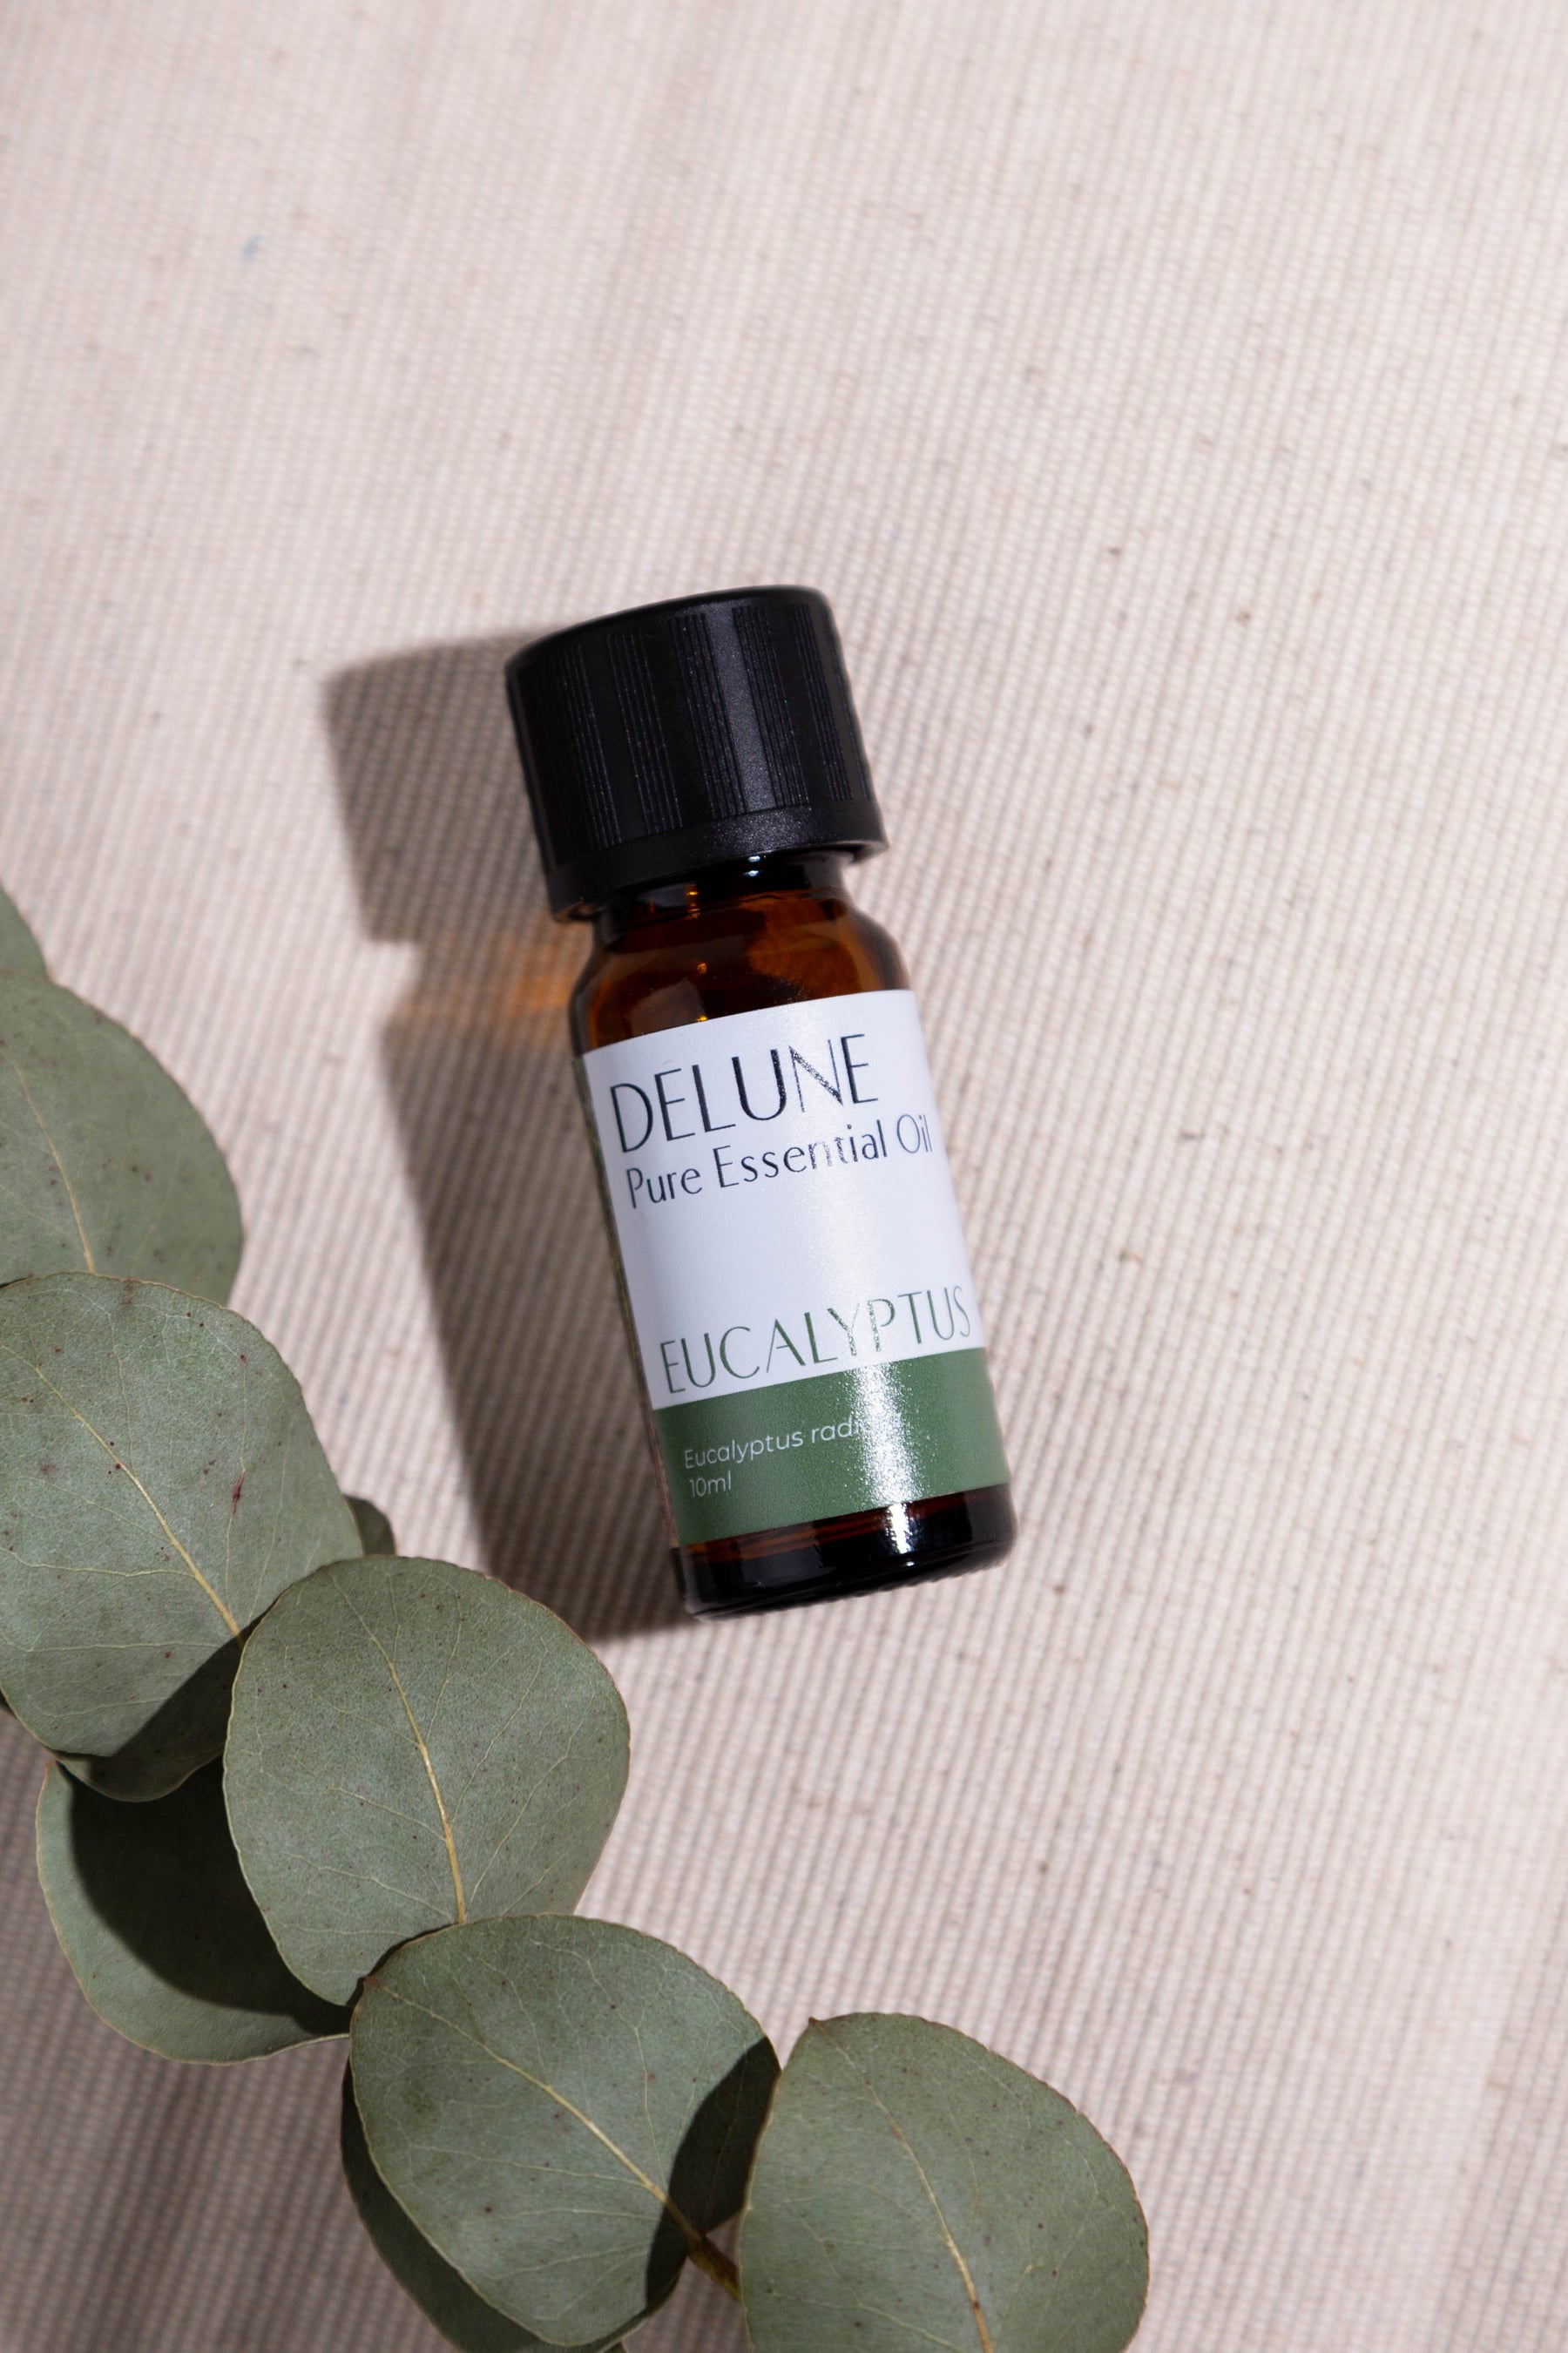 Delune's Pure Essential Oils and Their Impact on Mental Health